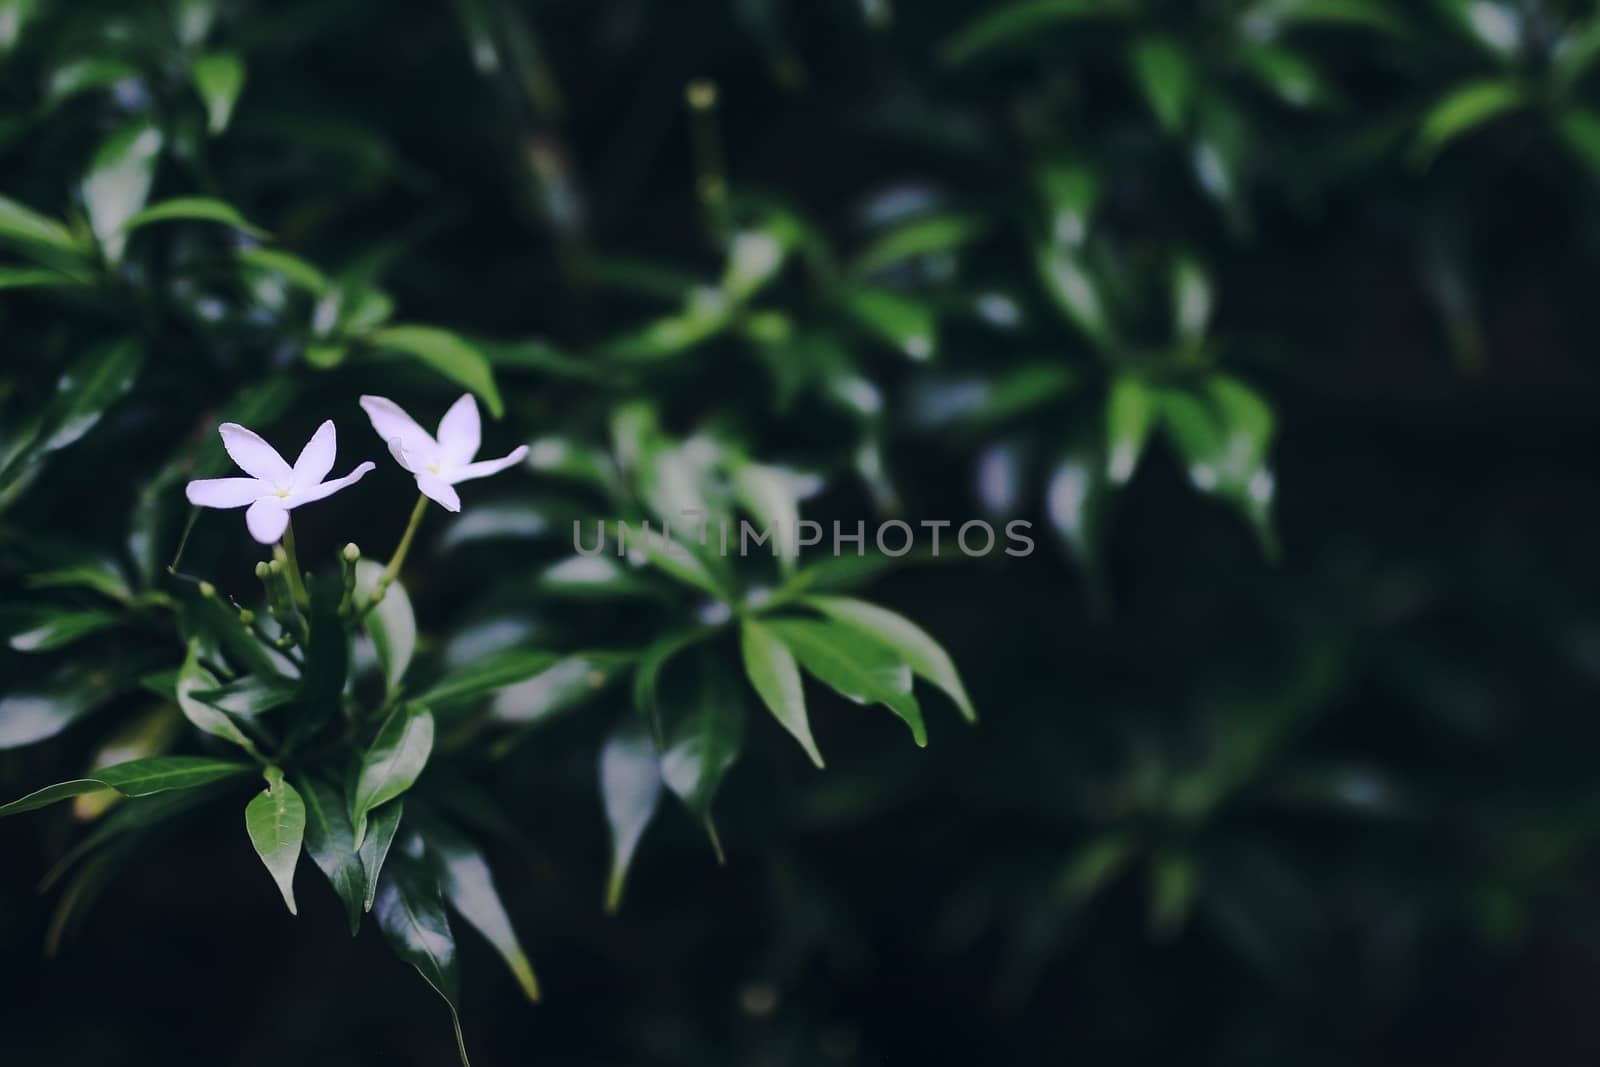 Wild flowers in nature, blurry background